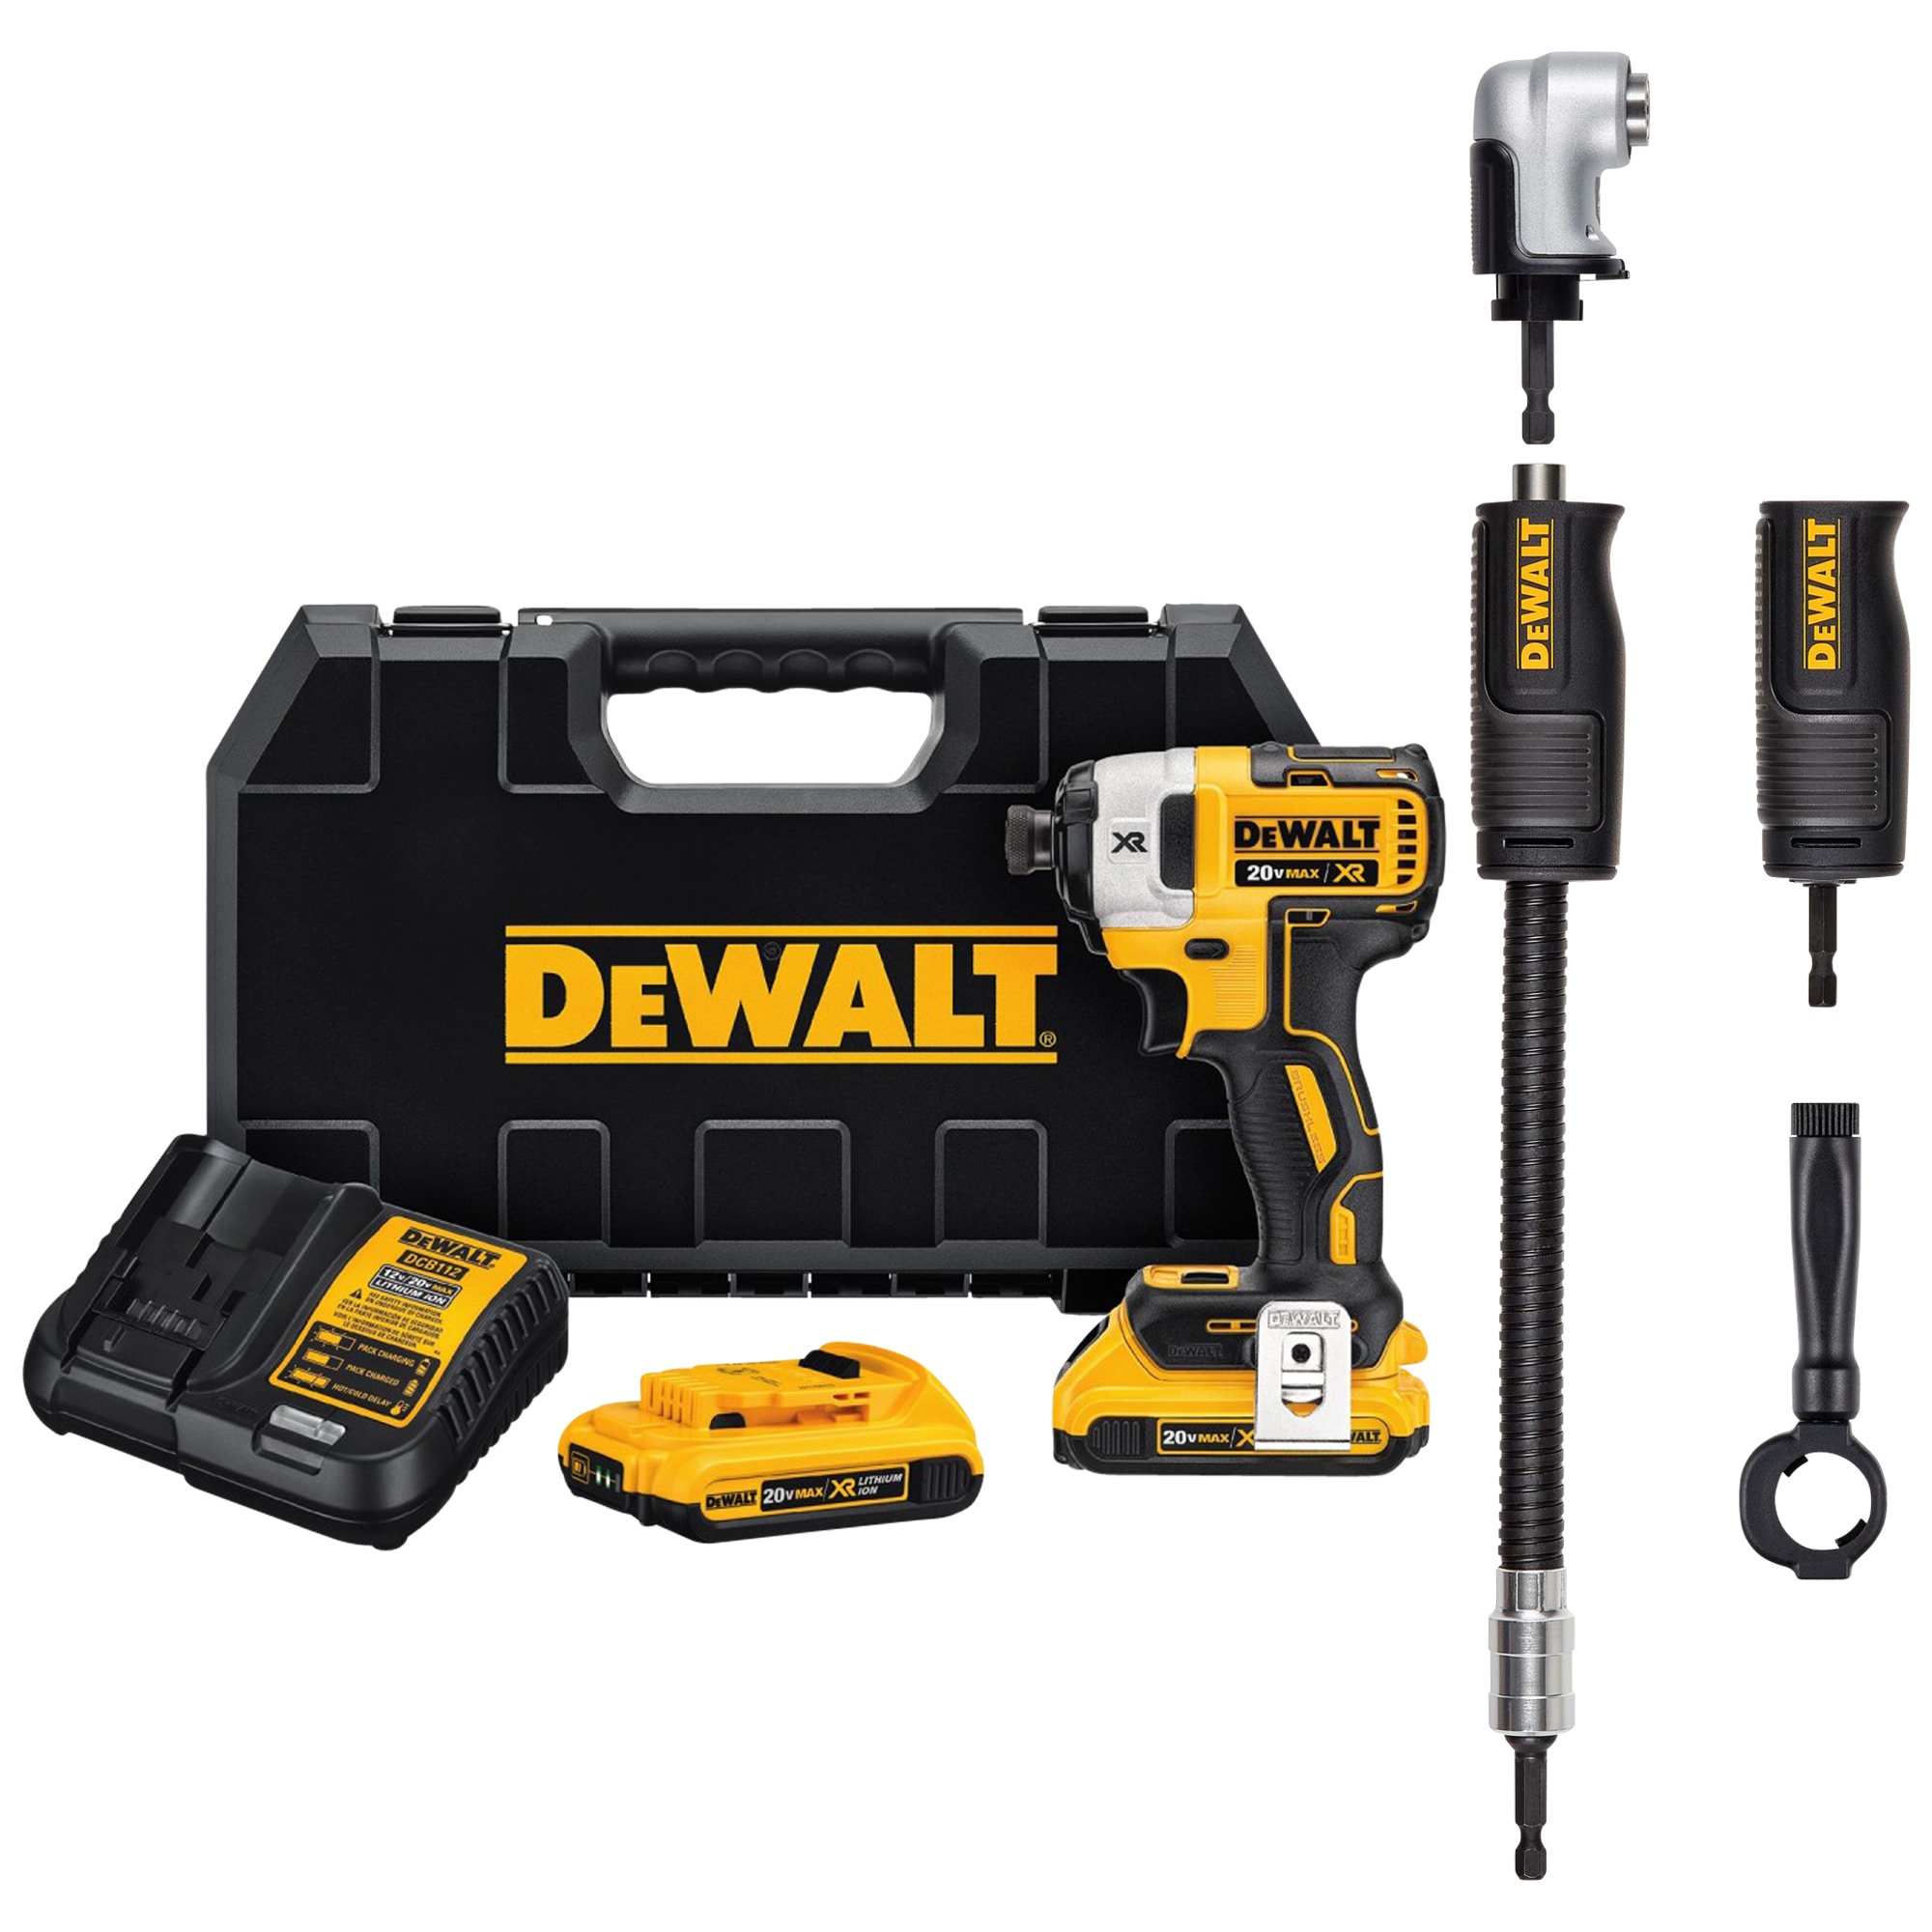 DEWALT XR 20-volt Max Variable Speed Brushless Cordless Impact Driver (2-Batteries Included) & Modular FlexTorq Right Angle Drill Attachment